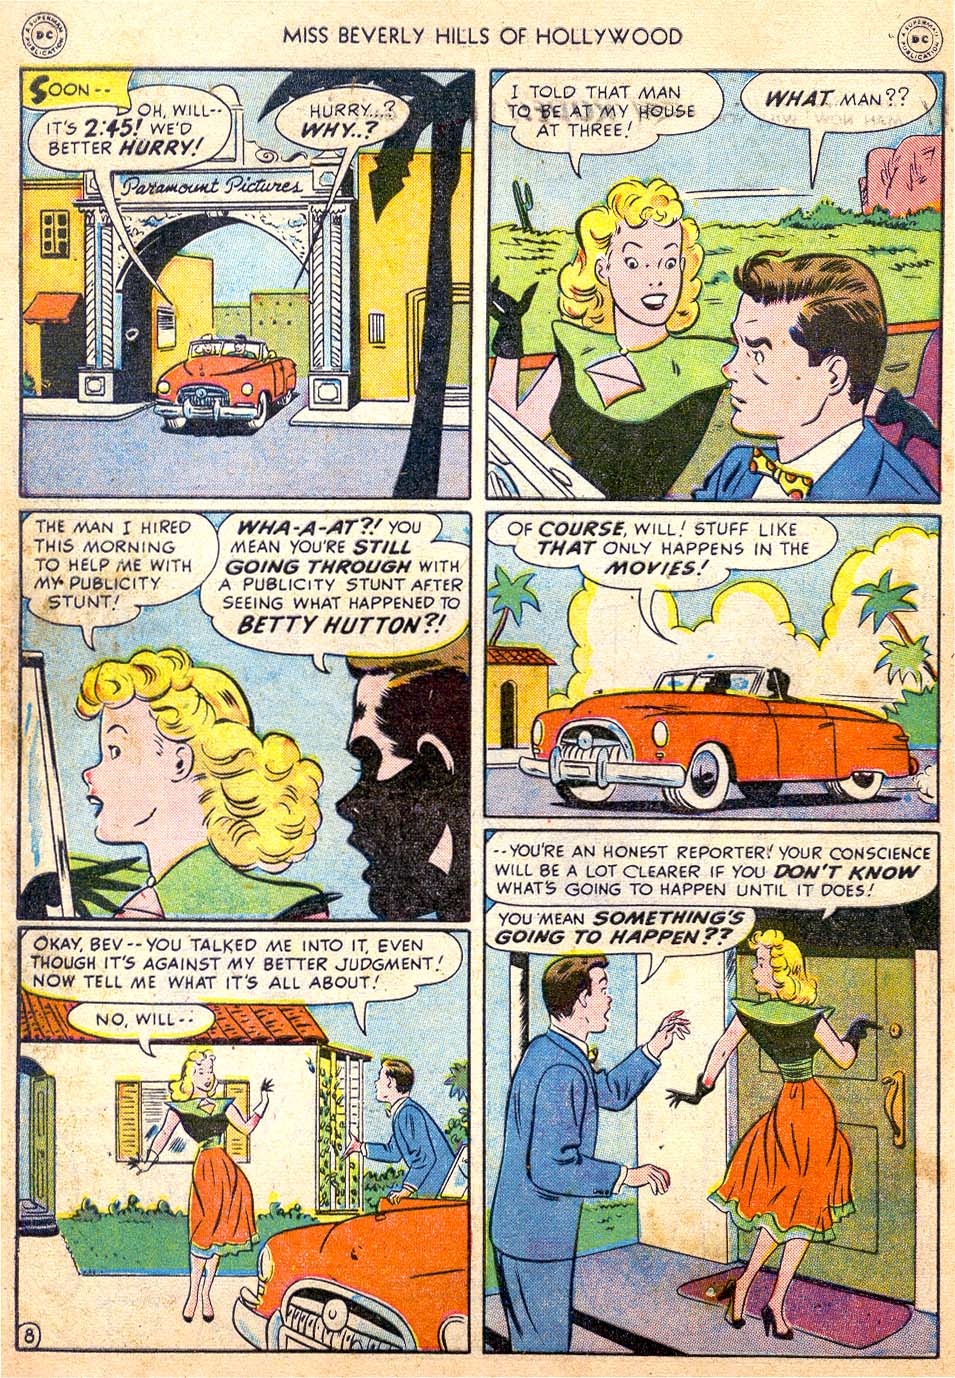 Read online Miss Beverly Hills of Hollywood comic -  Issue #4 - 10